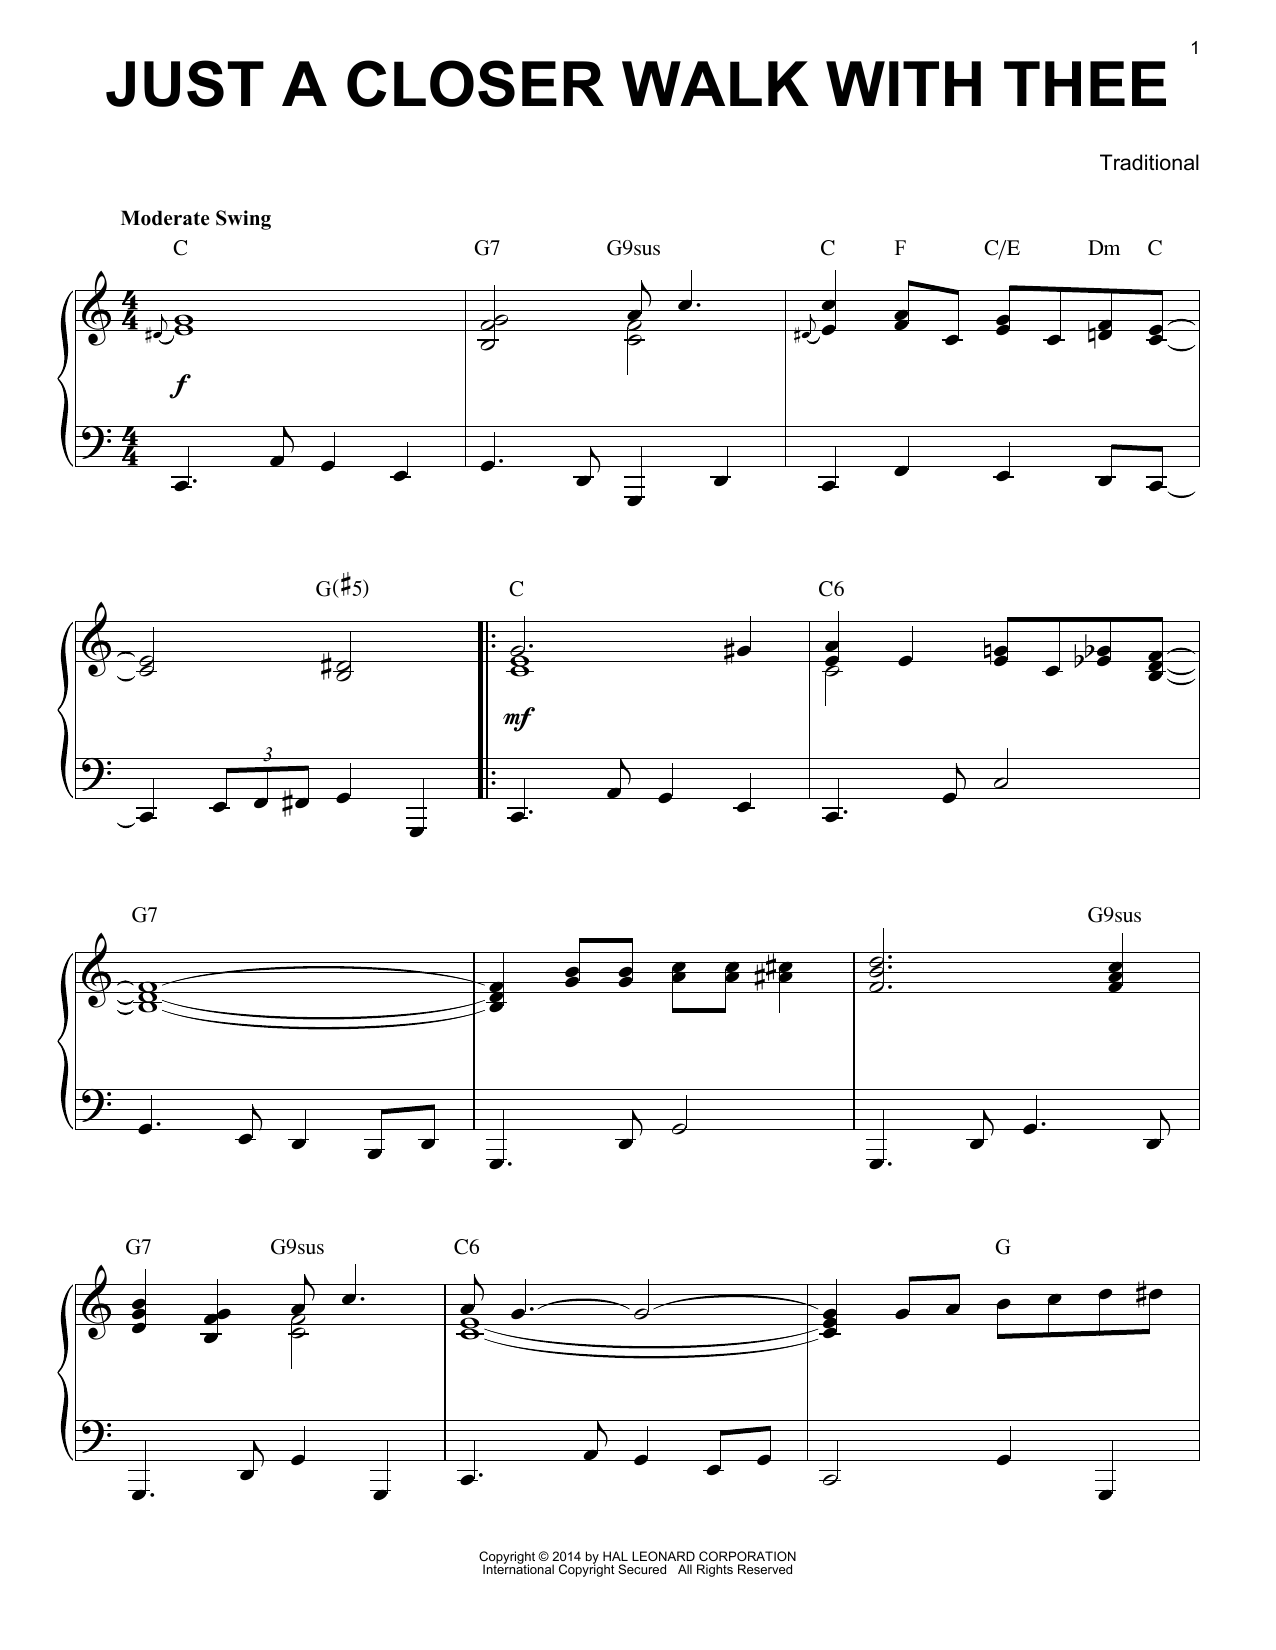 Download Traditional Just A Closer Walk With Thee [Jazz vers Sheet Music